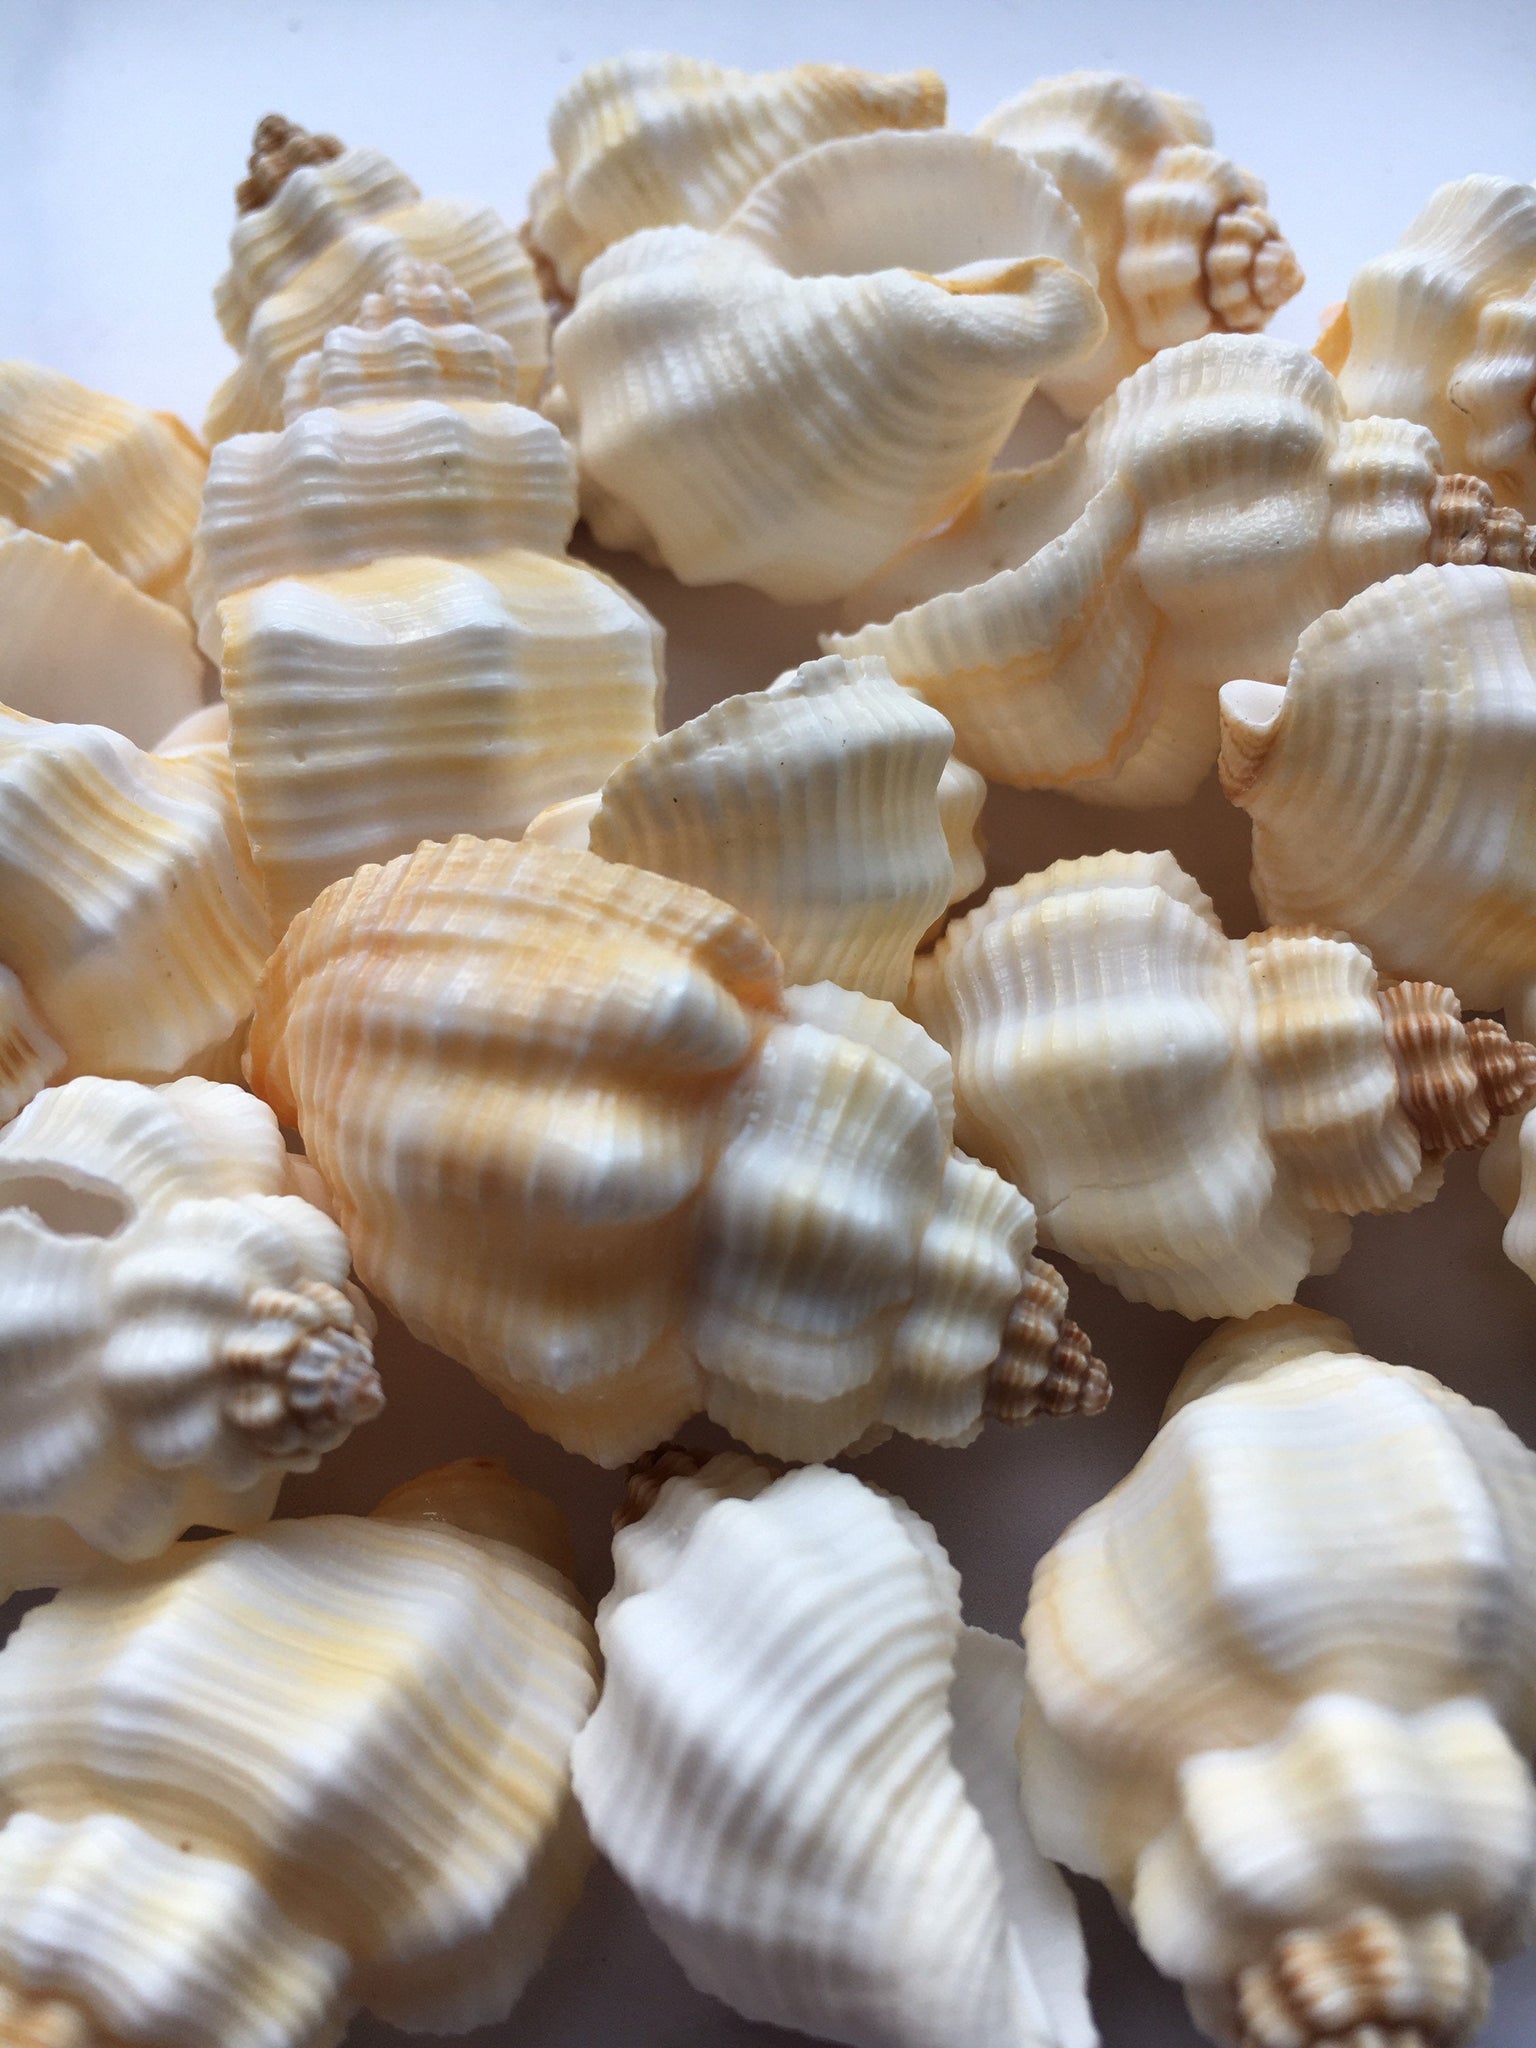 Shellebrate Nature's Gifts: Shelling and Shells in Sarasota